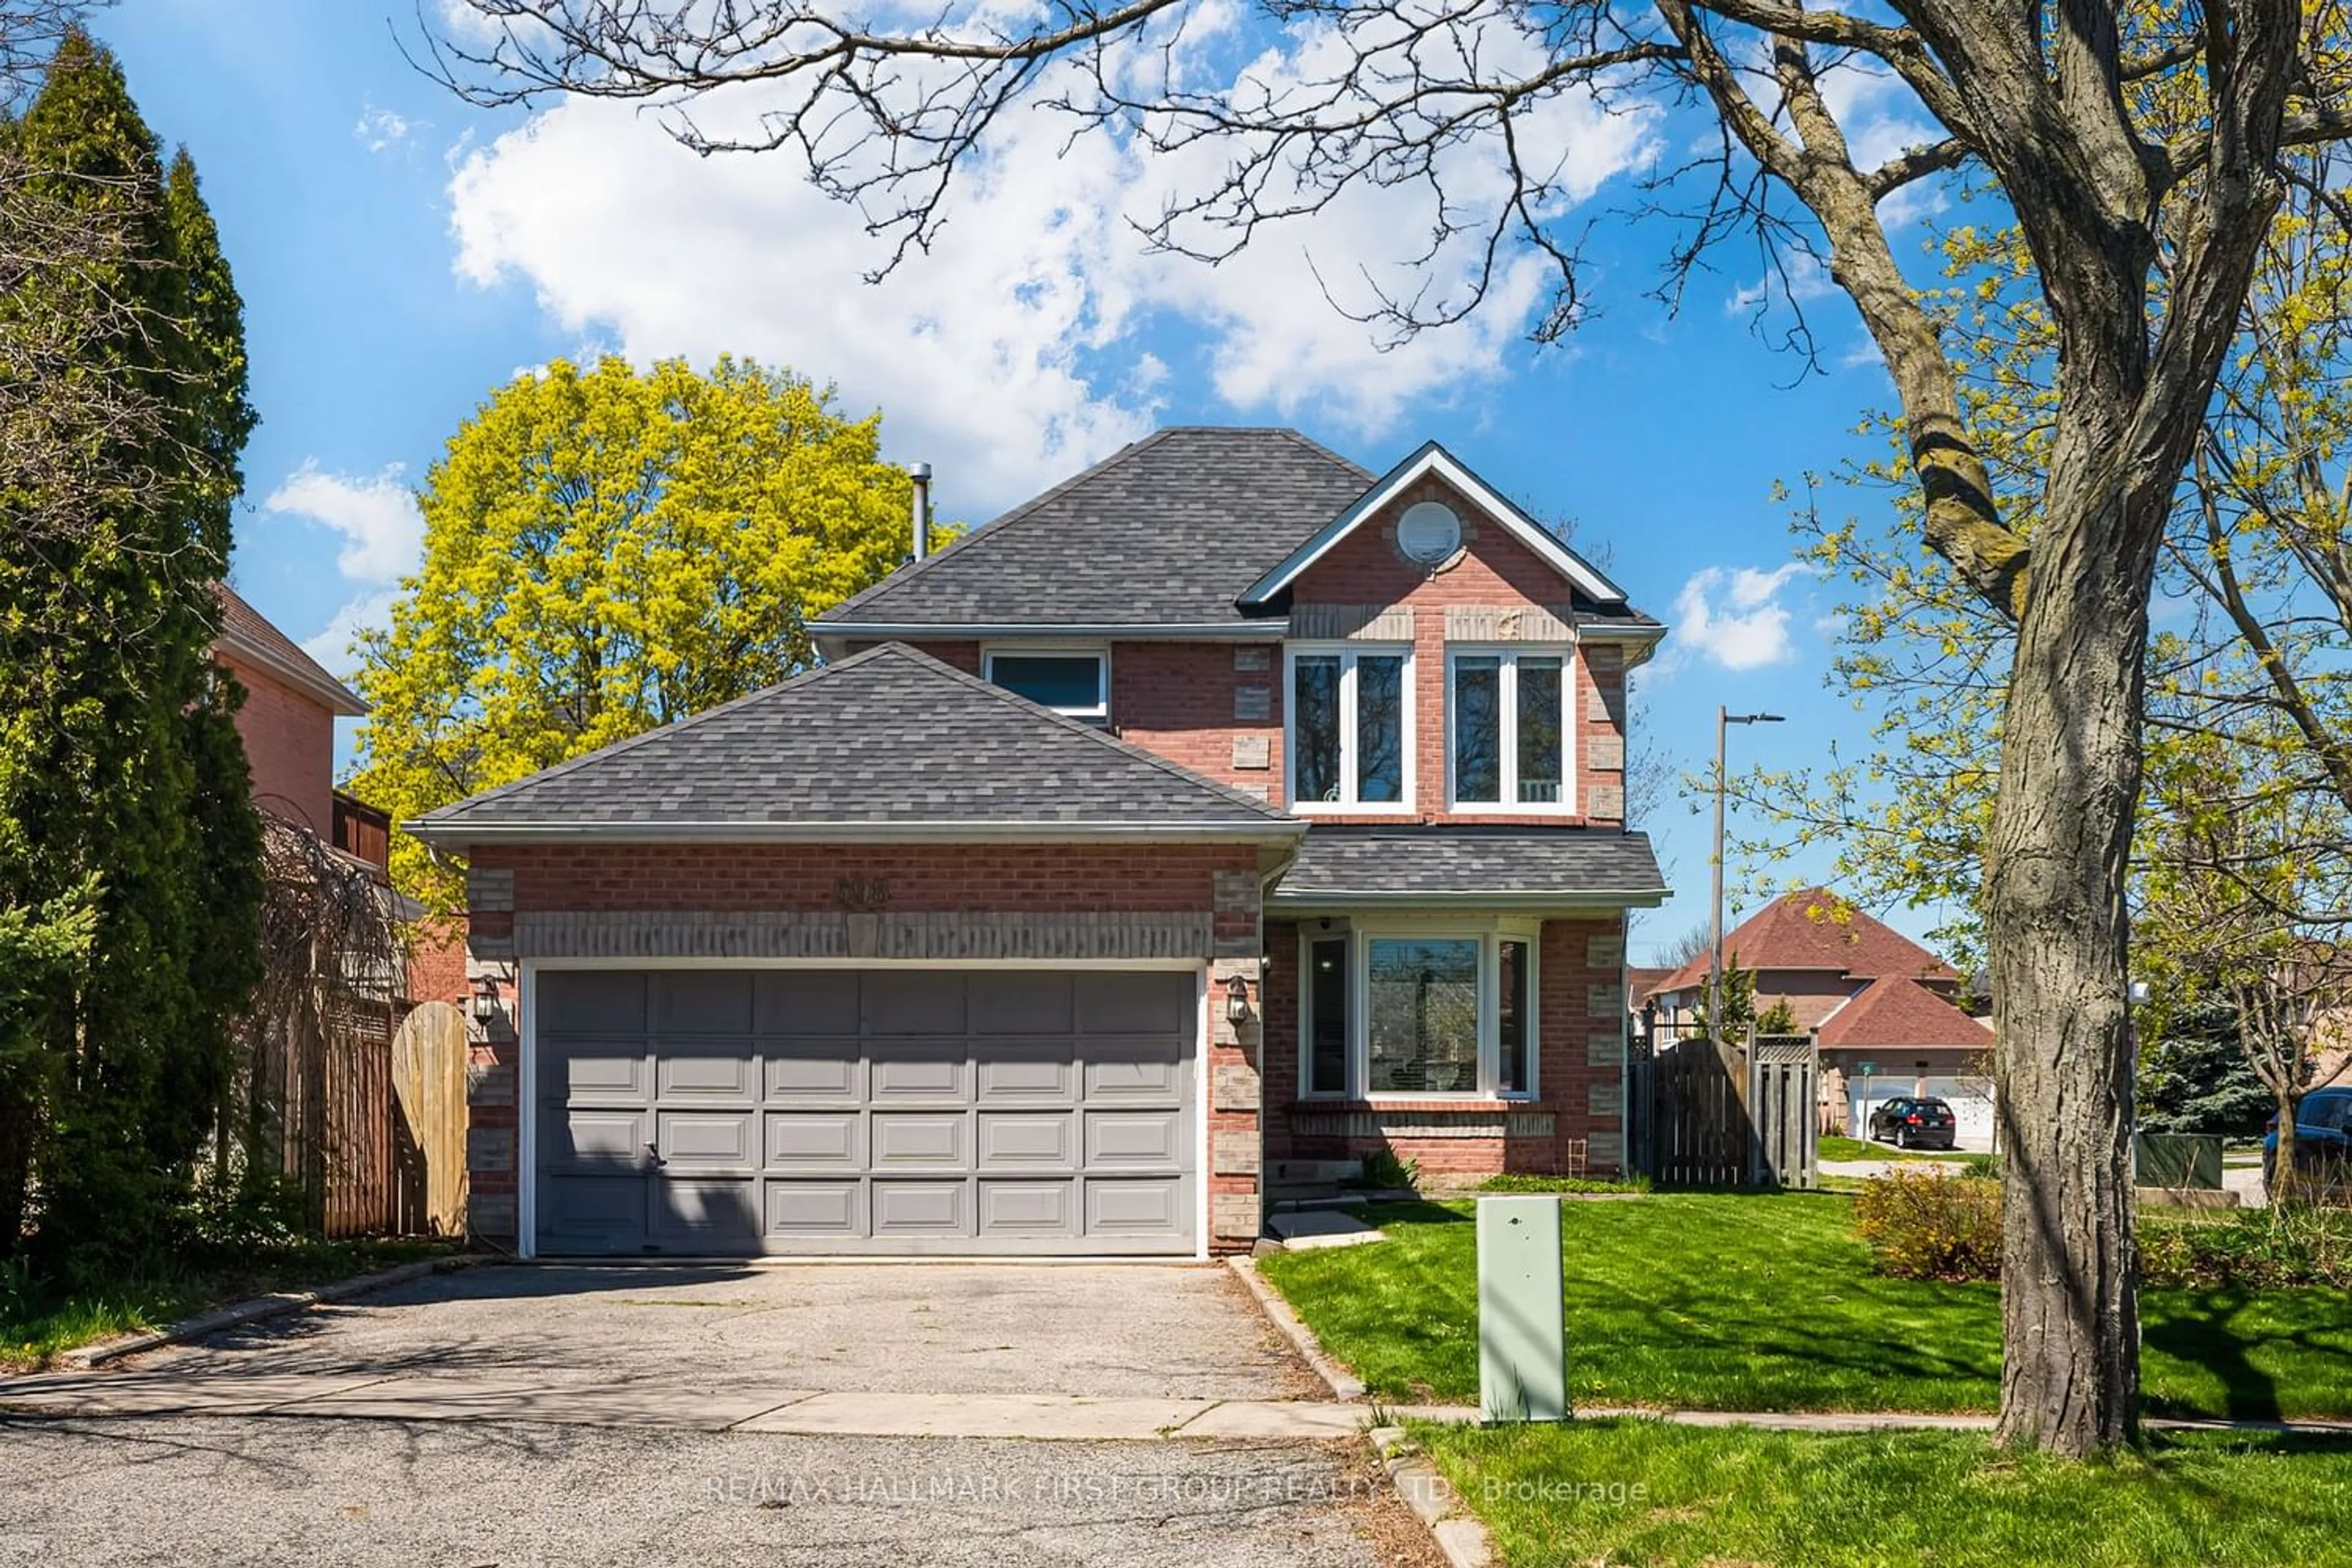 Home with brick exterior material for 698 Lamour Rd, Pickering Ontario L1V 6N9